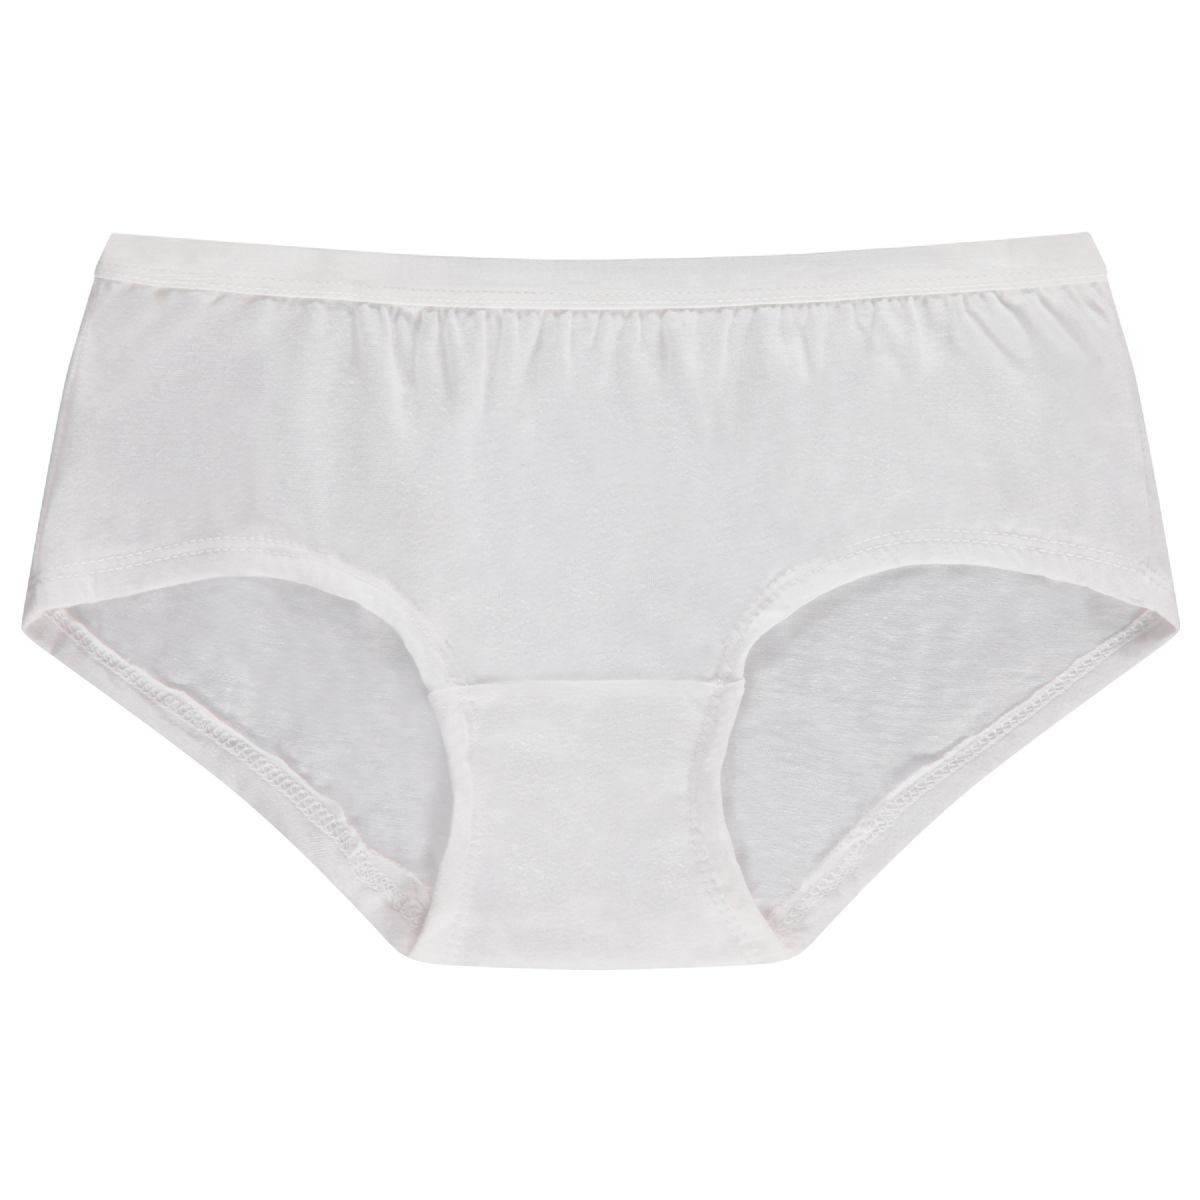 48 Pieces Yacht & Smith Womens White Underwear, Panties In Bulk, 95% Cotton  - Size S - Womens Panties & Underwear - at 